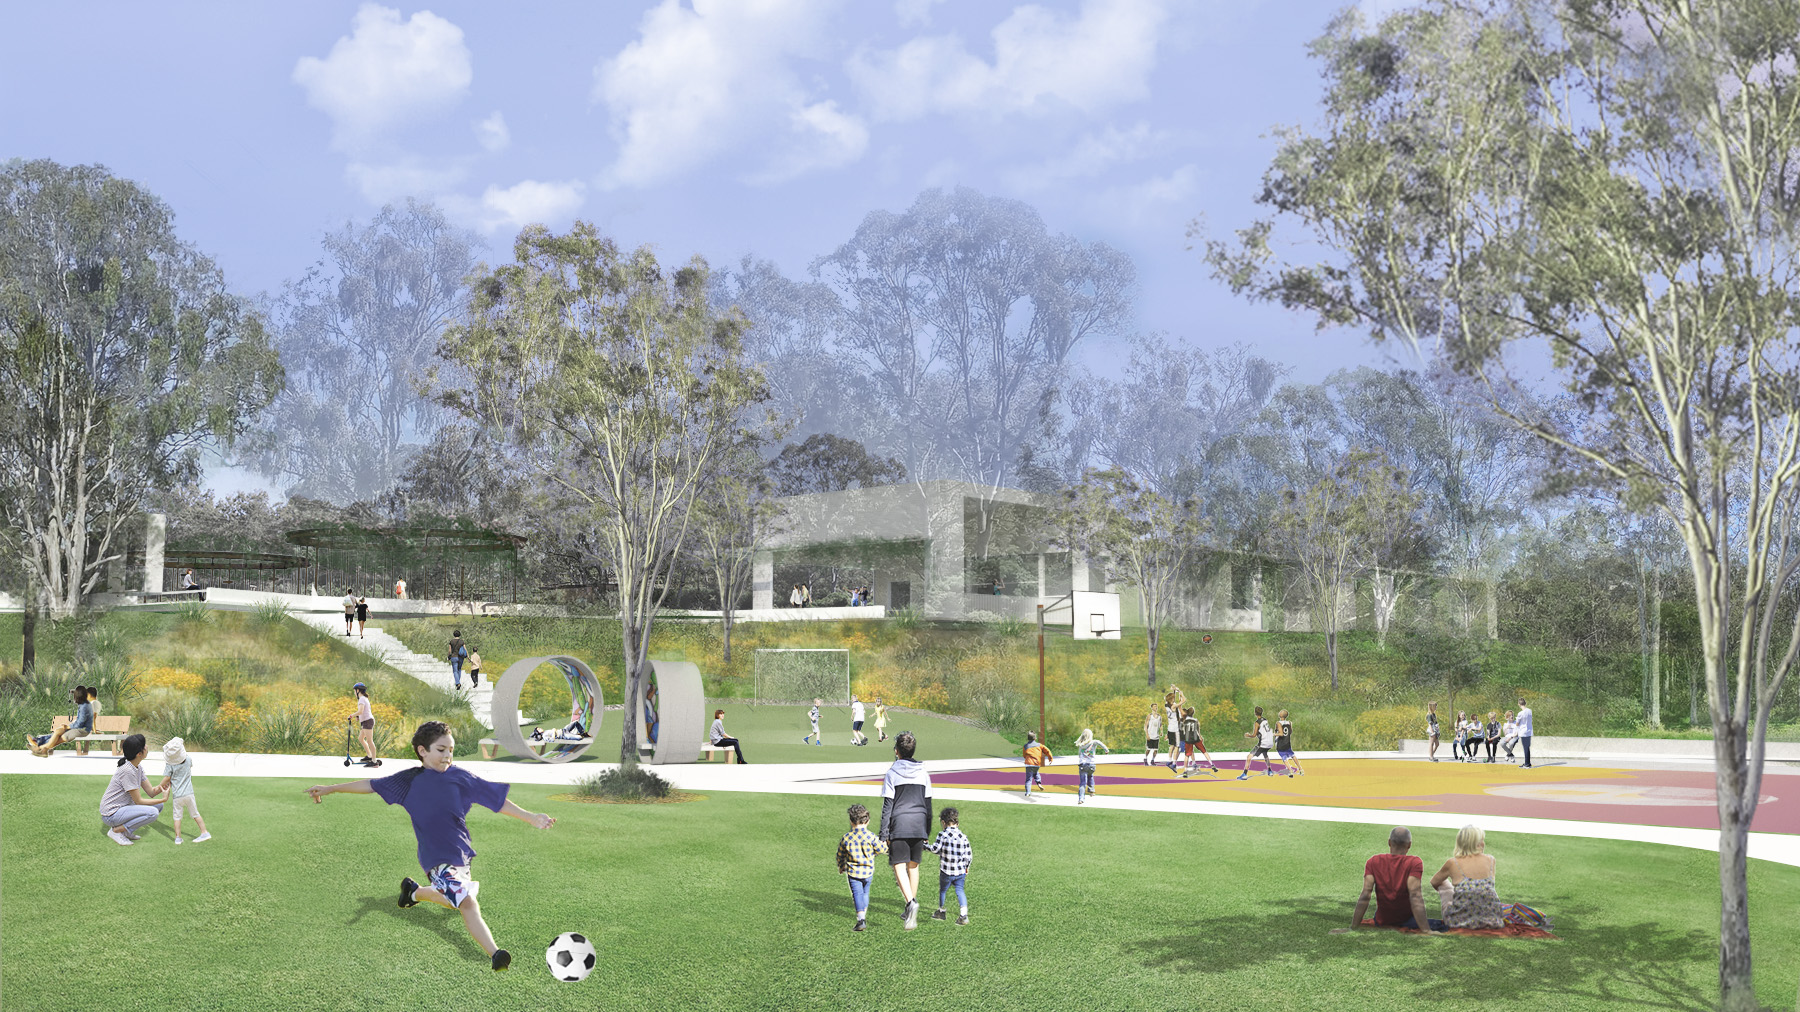 Artists impression of children playing soccer on a field with a playground and community centre in the background through a rugged Australian flora landscape.